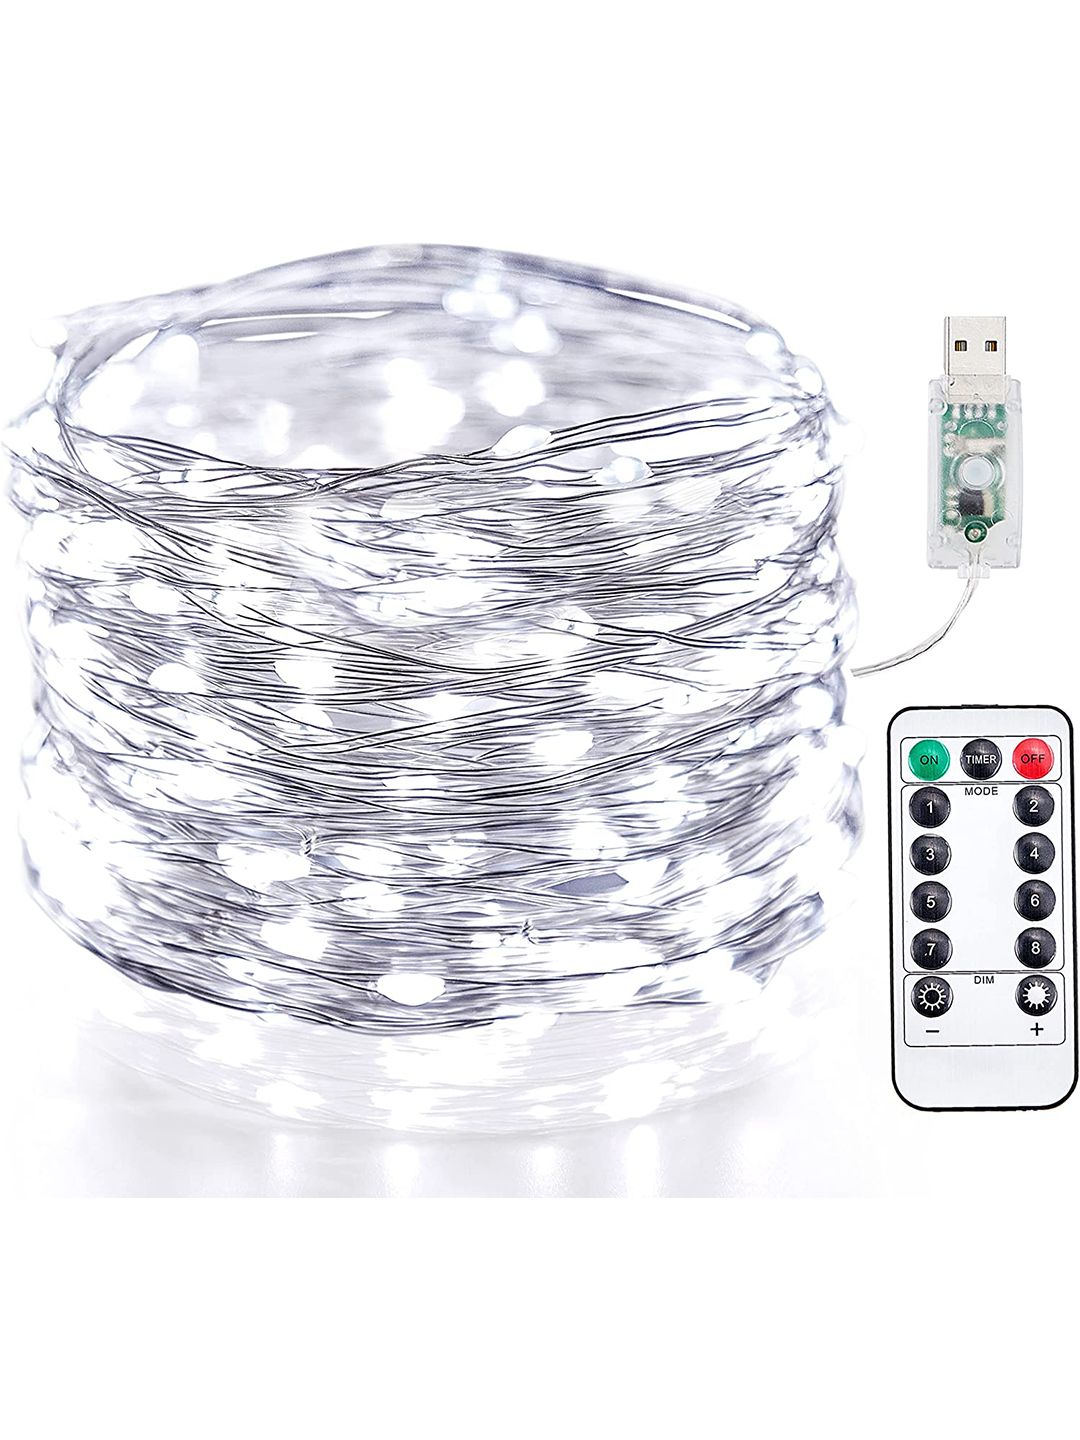 XERGY White 100 LED Silver Wire String Lights 8 Modes USB Powered with Remote Control Price in India